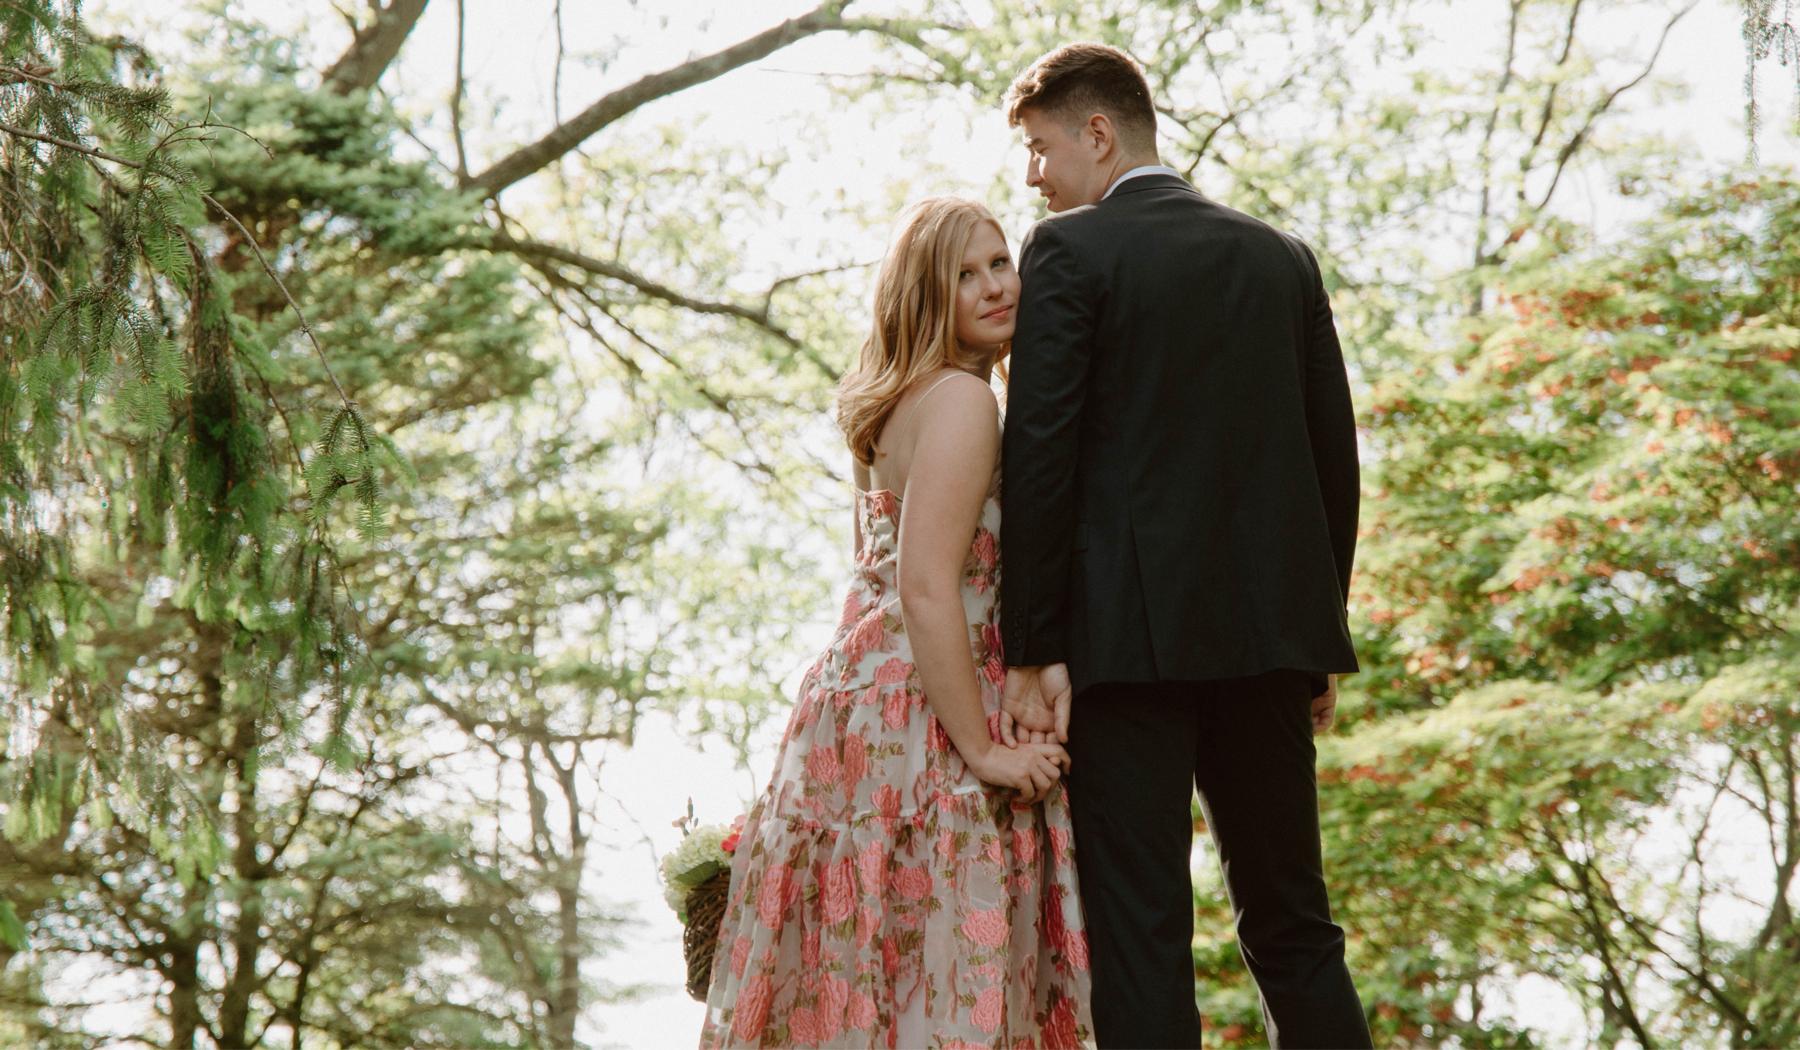 The Wedding Website of Laurel Kate Anderson and Brian Hall Hoscheit